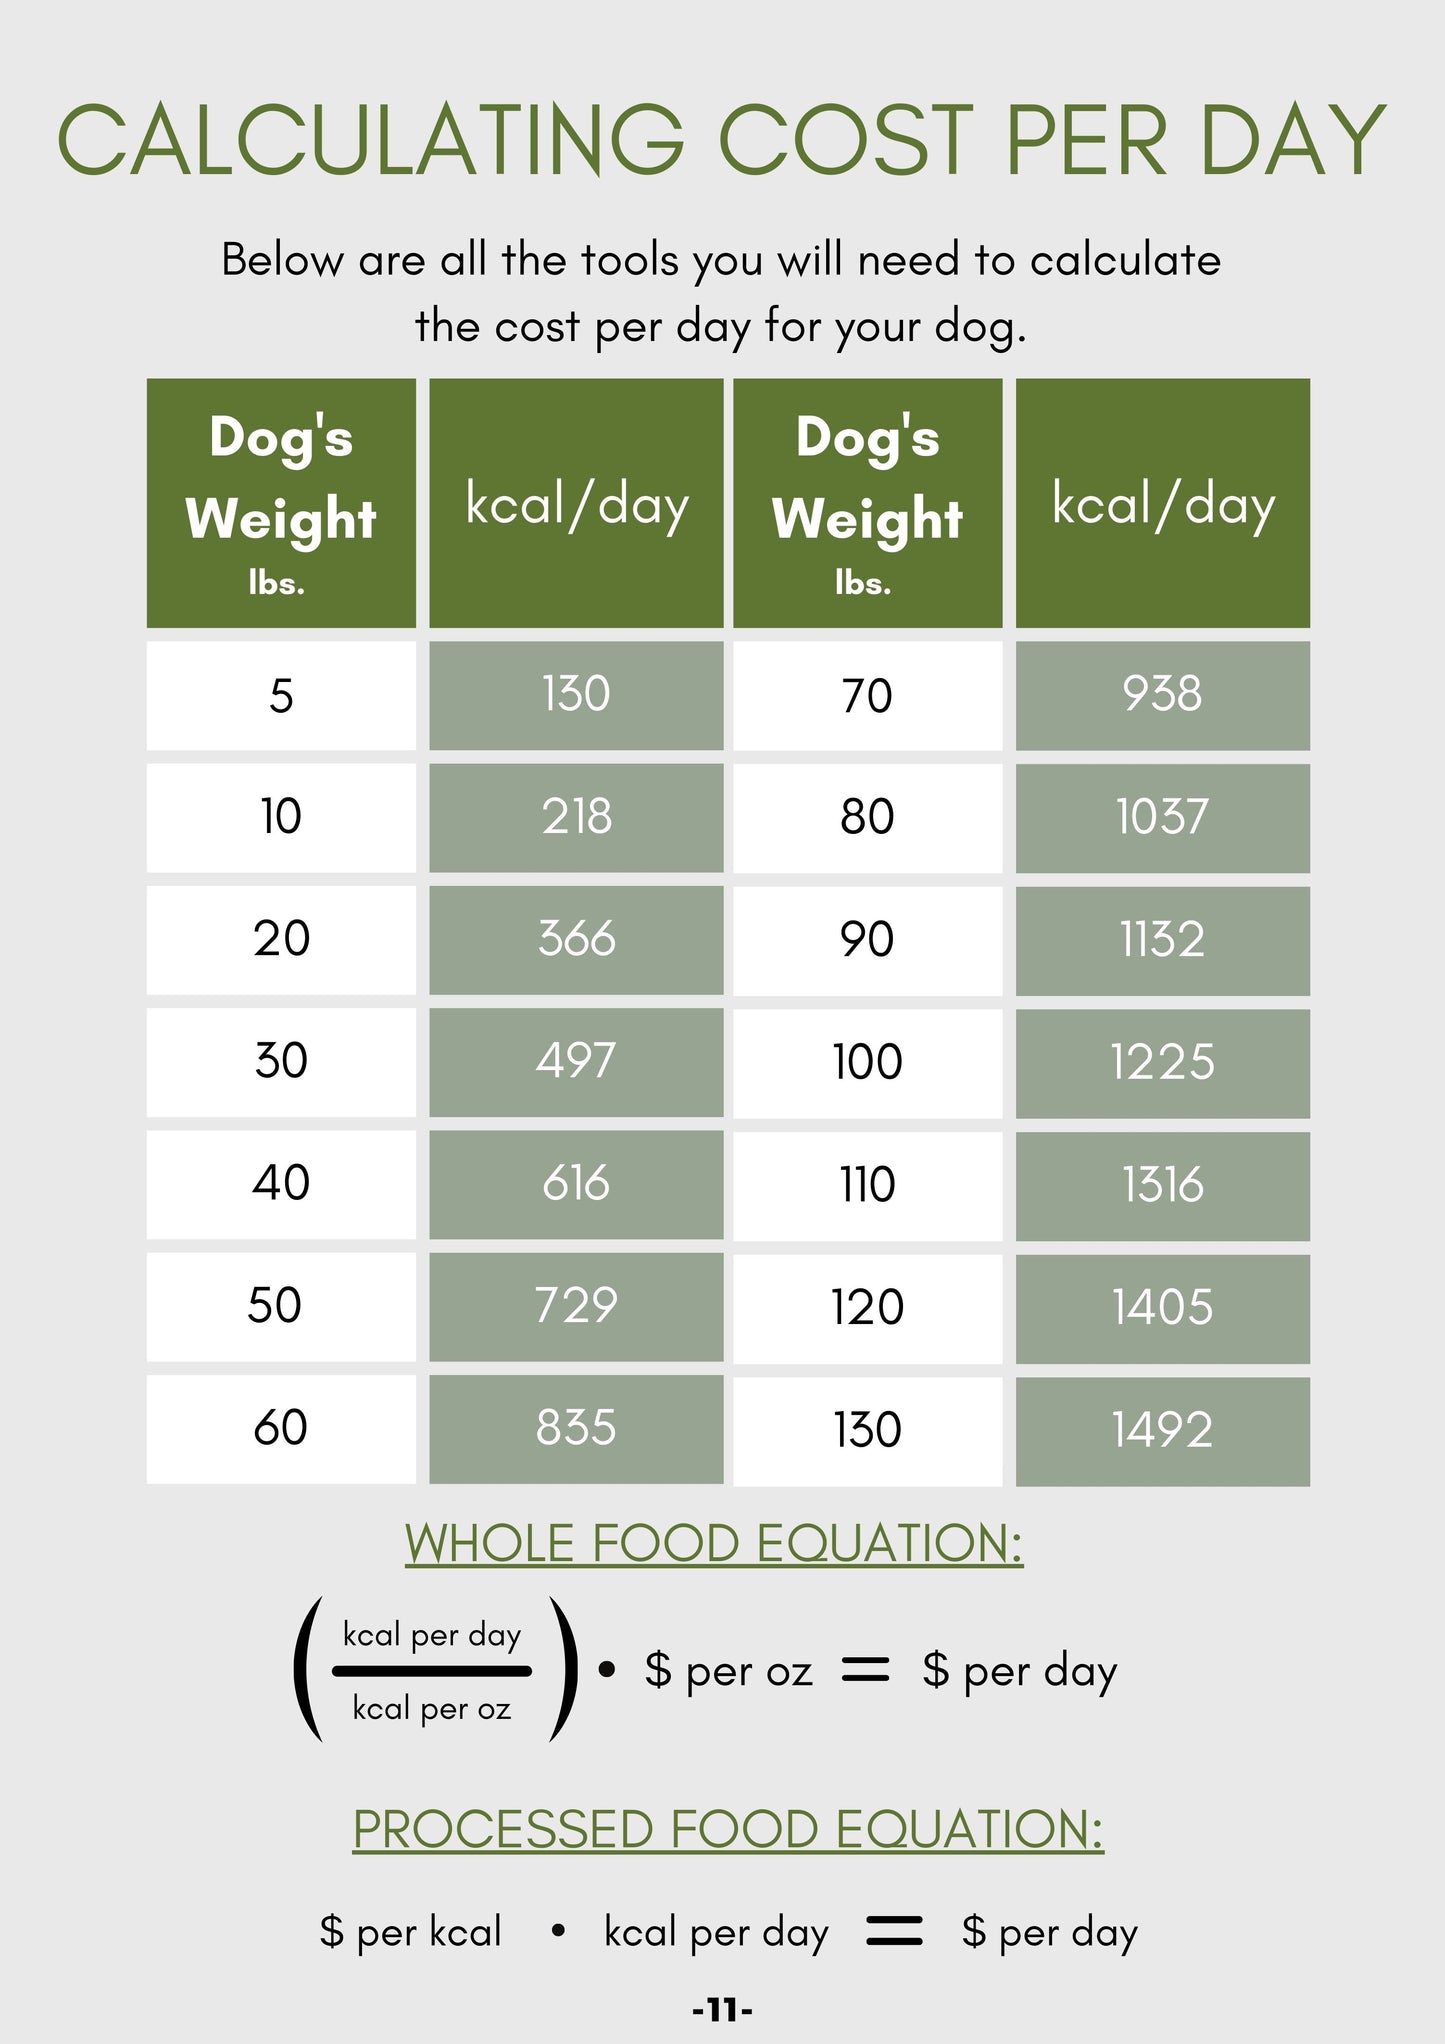 Best Foods for Your Dog - Premium eBook (Includes cost comparison charts)